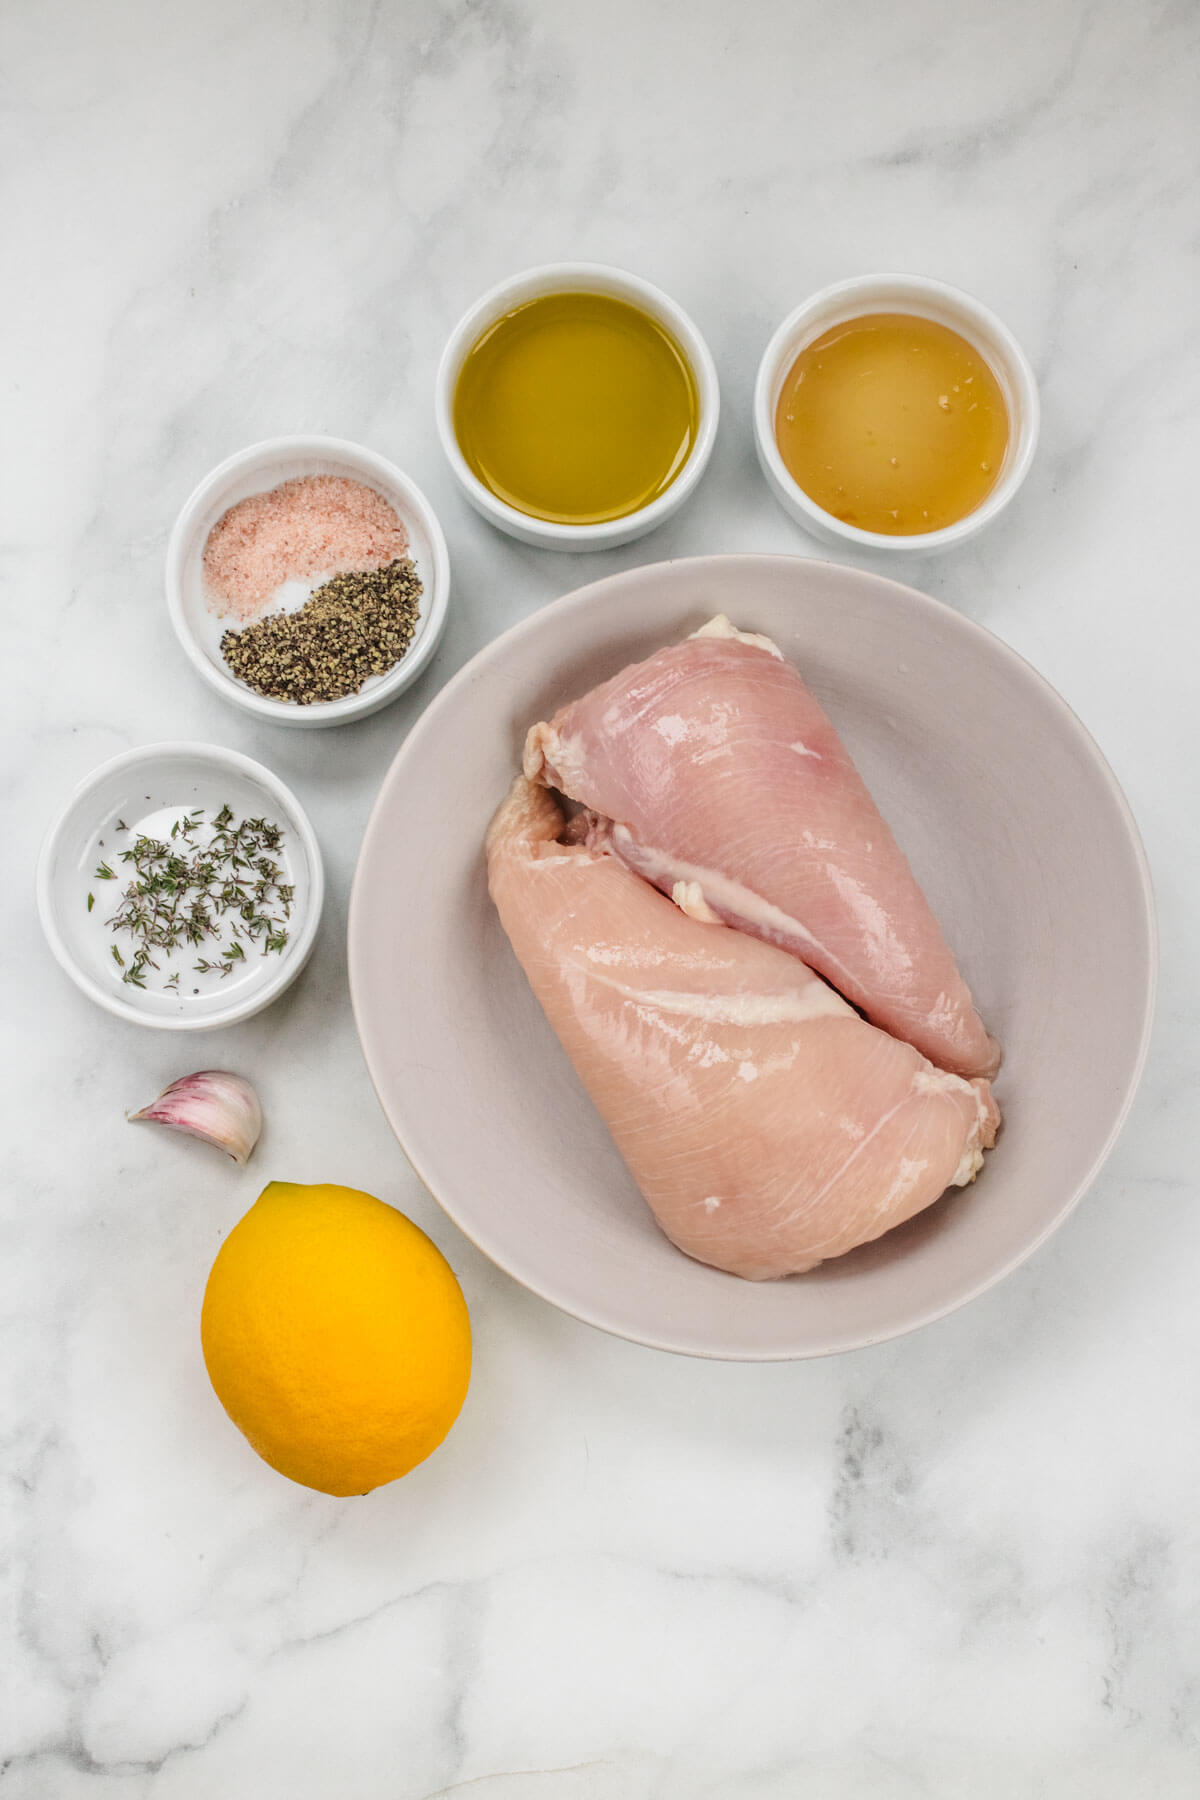 Ingredients to make lemon chicken marinade laid out.